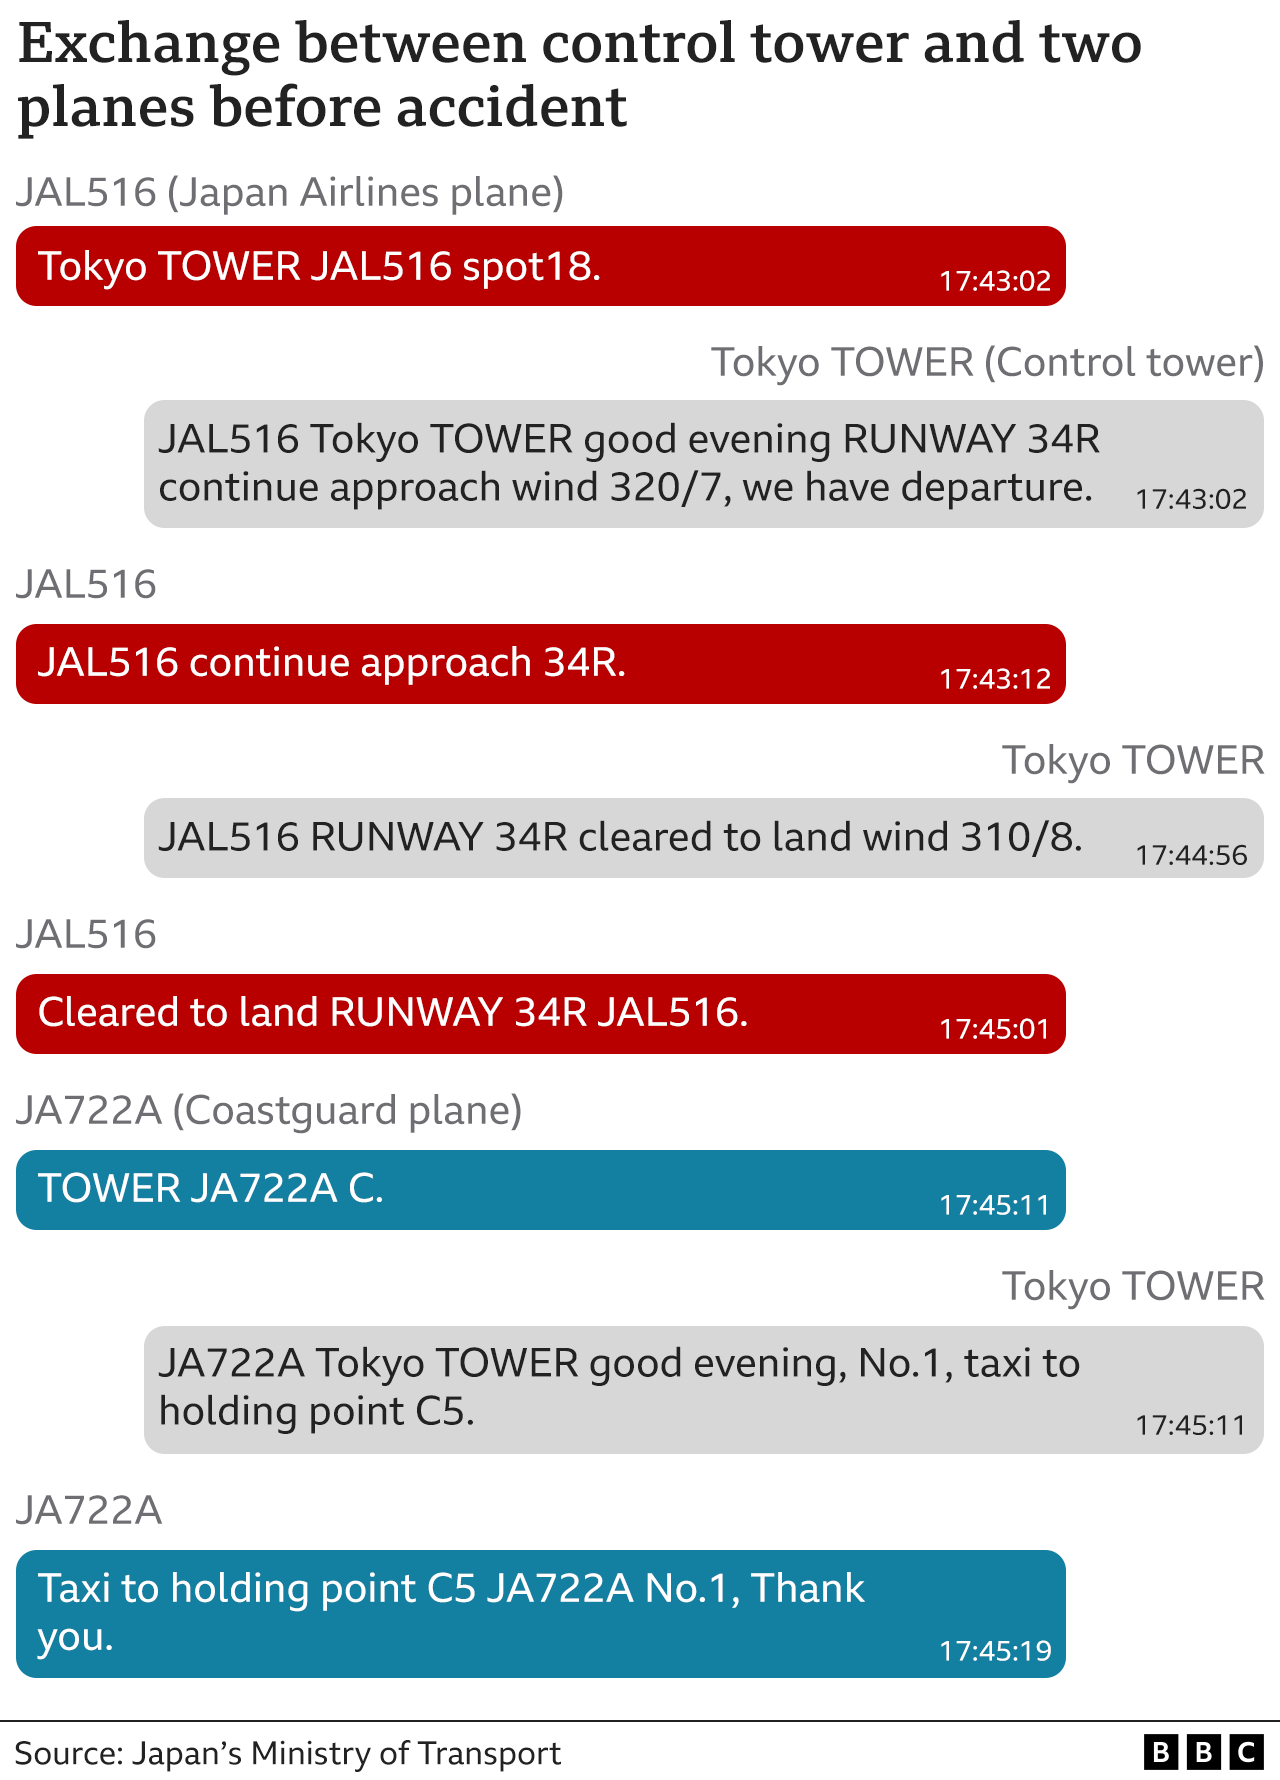 Graphic showing the transcript of air traffic control calls between the two aircraft